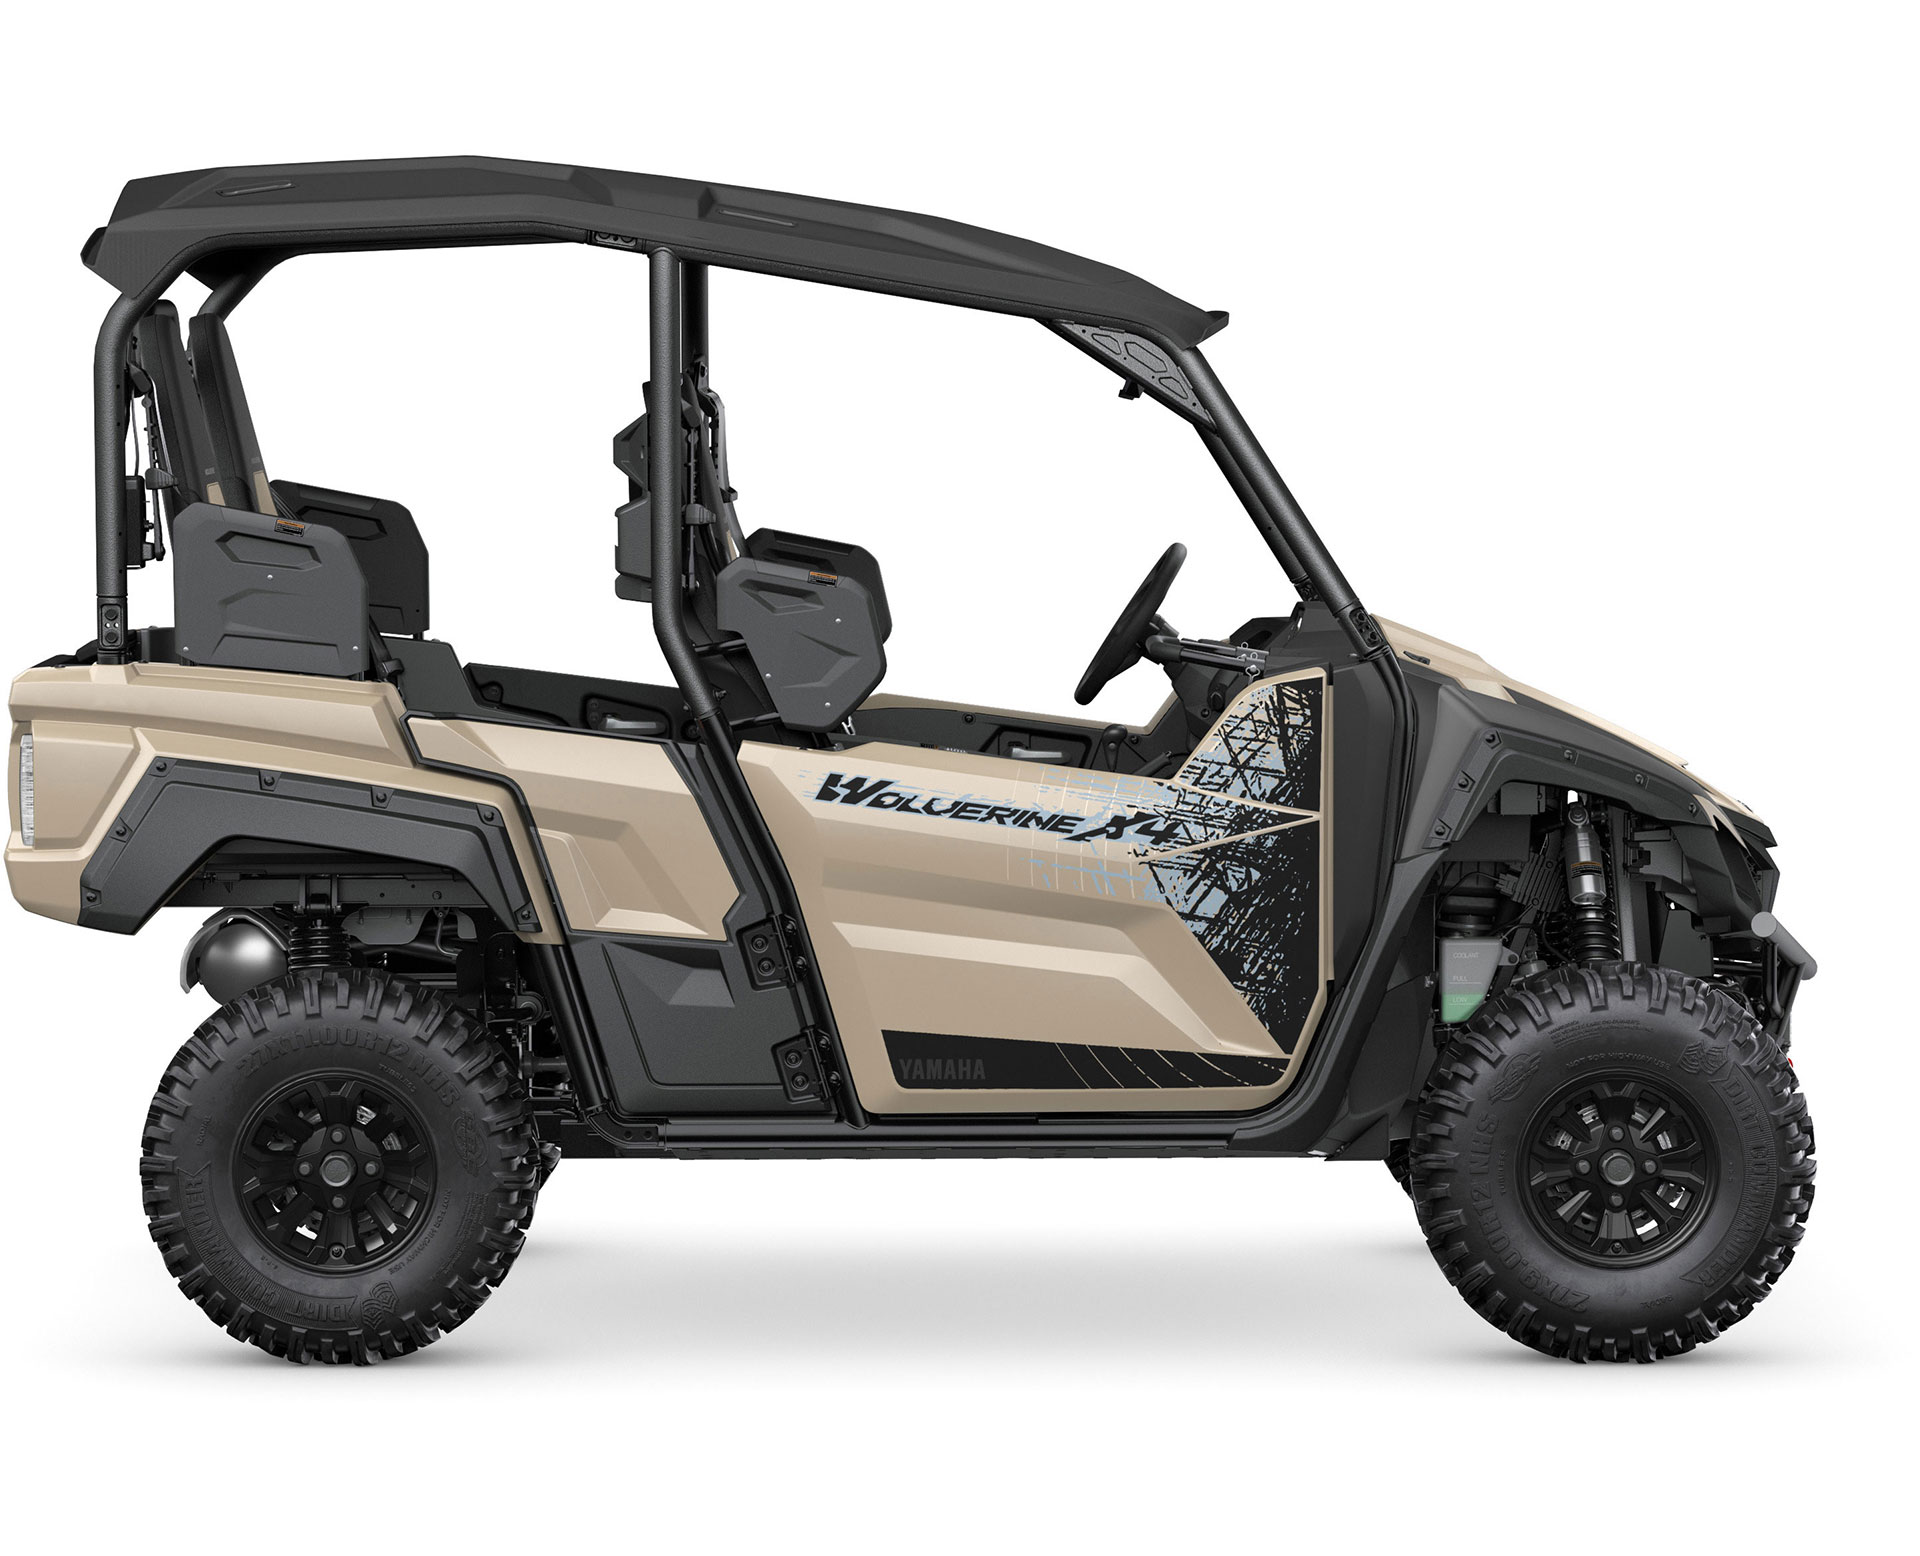 Thumbnail of your customized 2023 WOLVERINE X4 850 SE